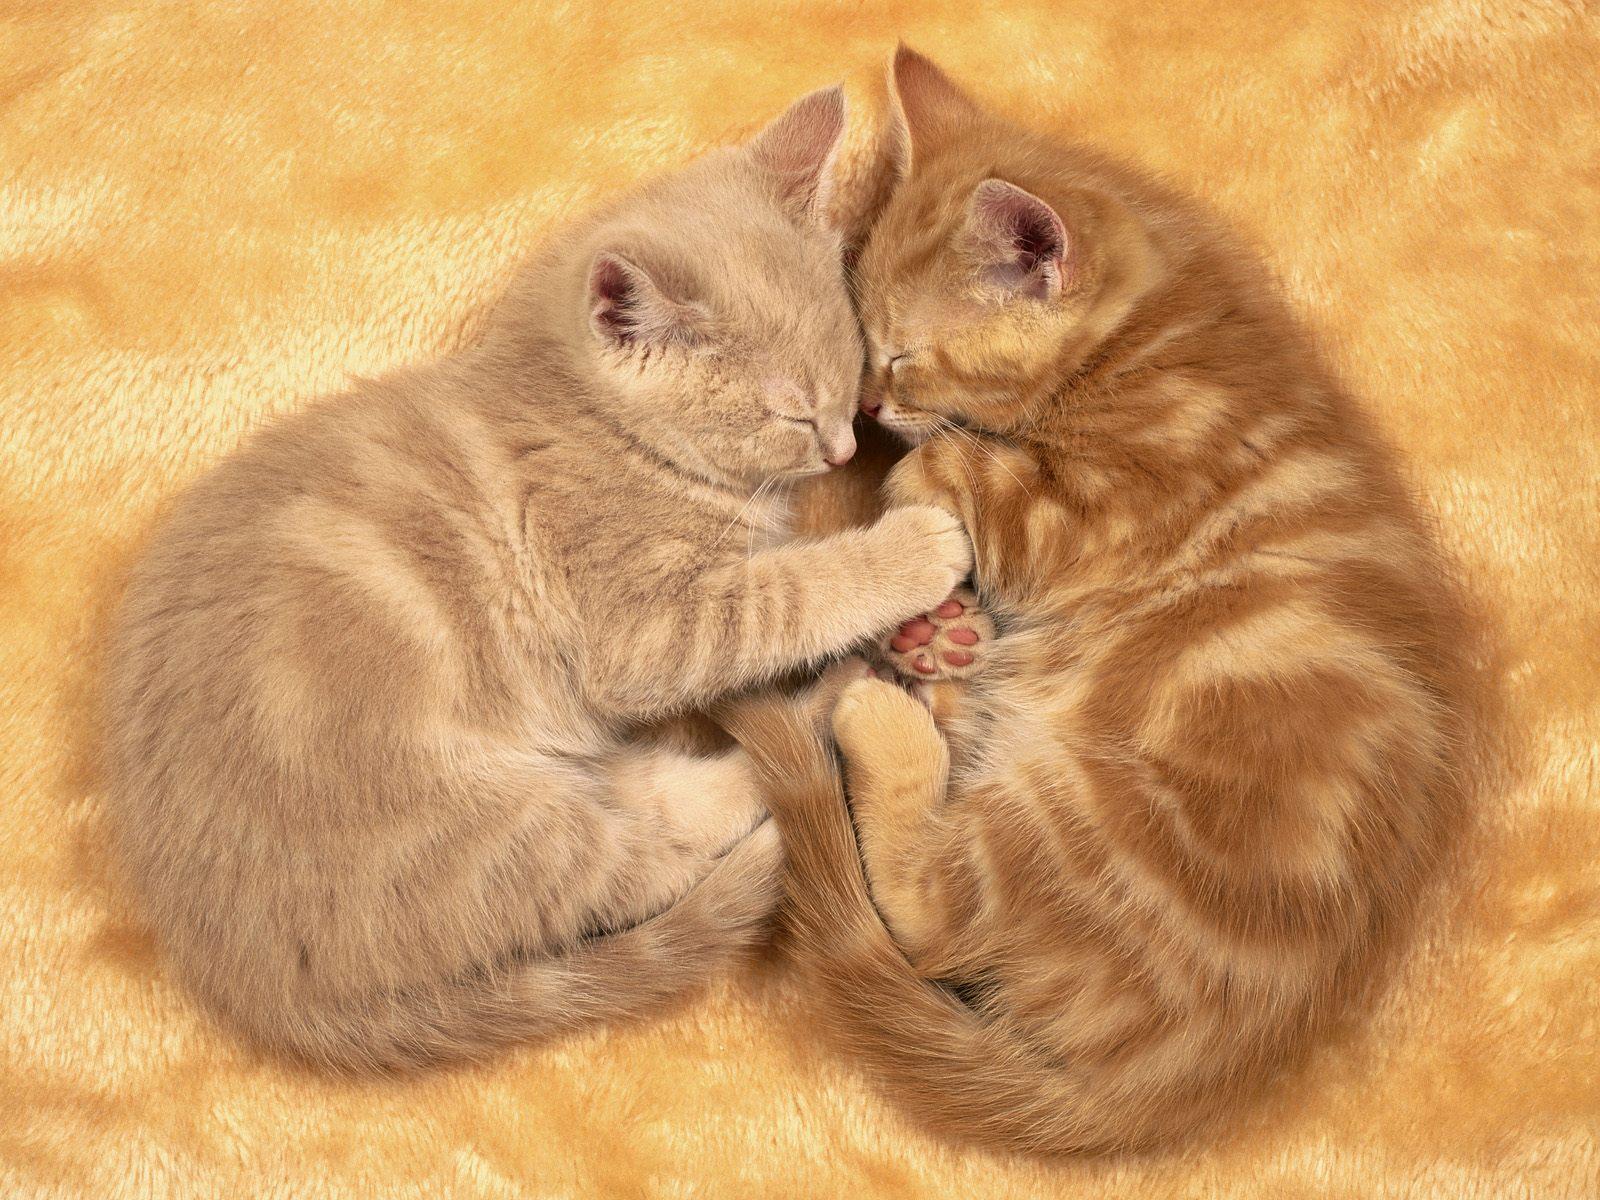 Lovely And Sweet Animal Picture For Valentine's Day